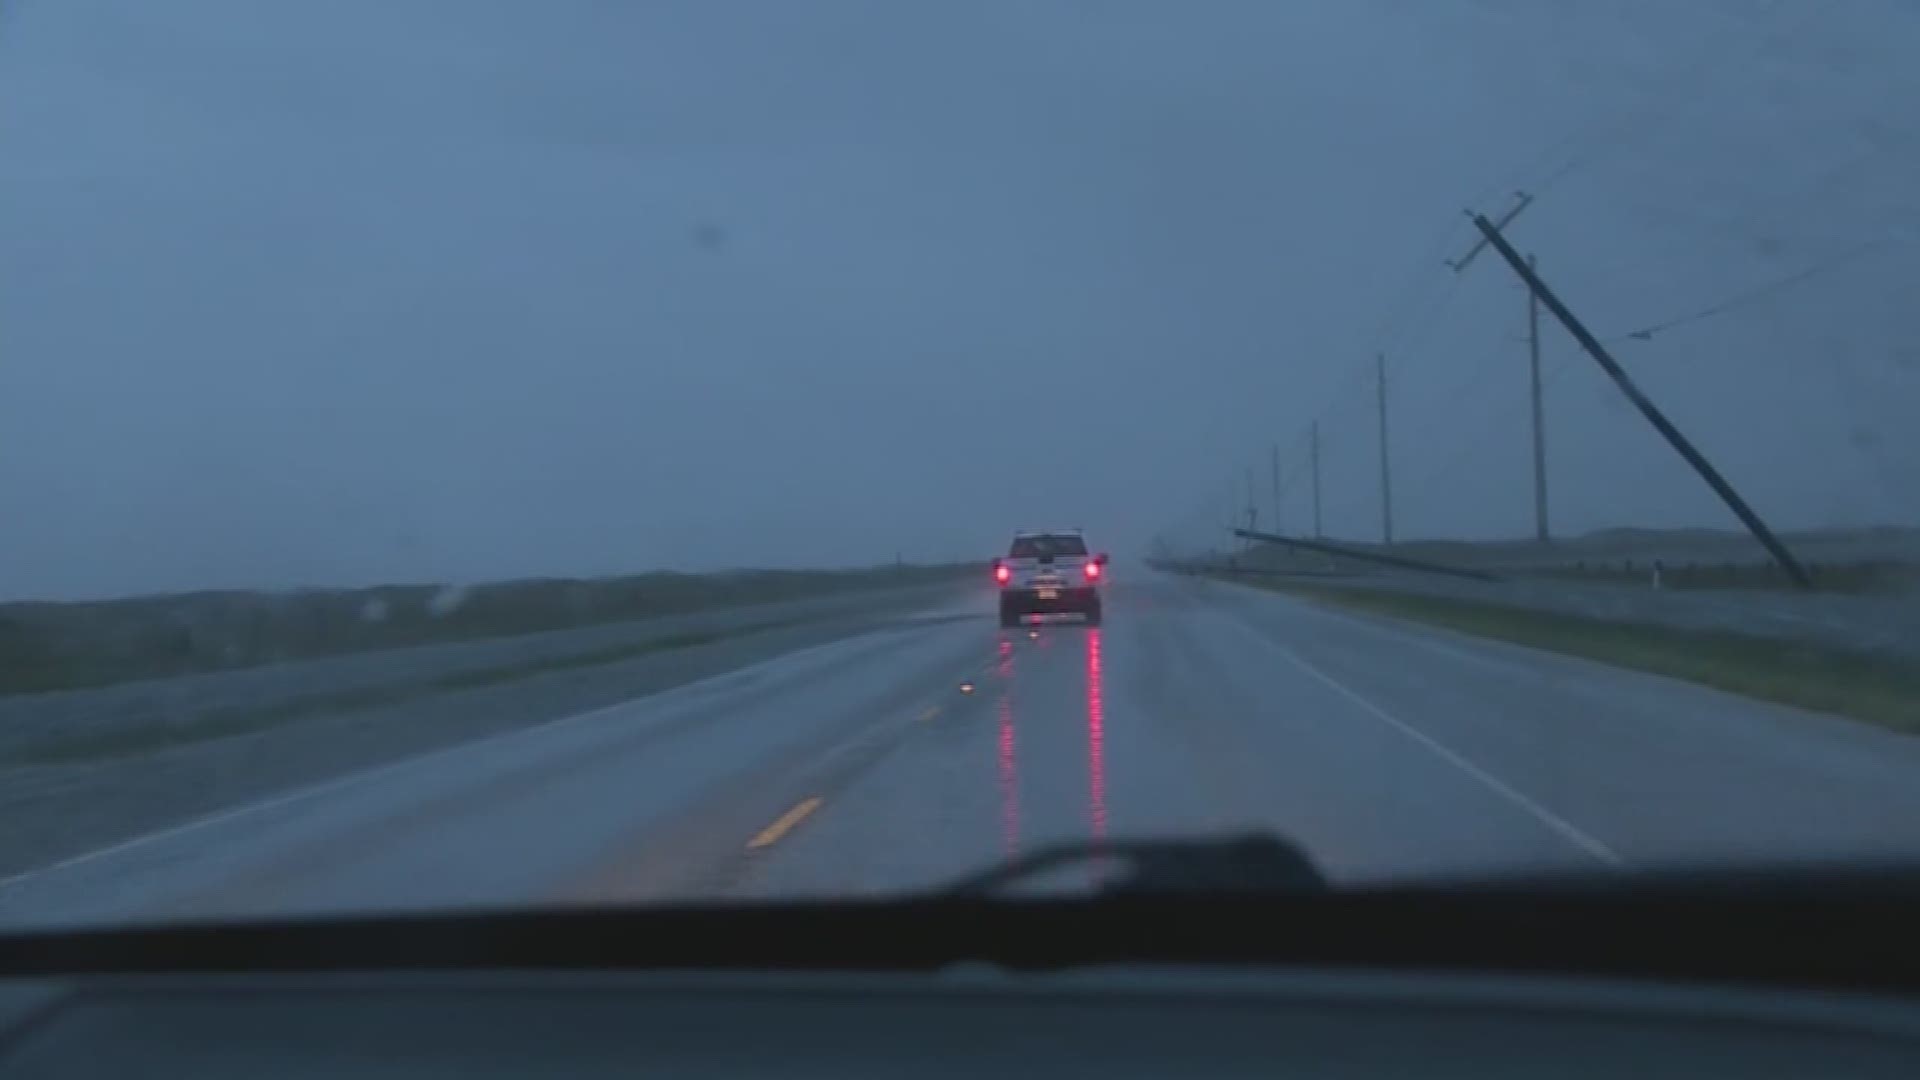 As authorities head back into Port Aransas, we get our first look at the damage heading into that area, including many downed utility poles and lines. (8/26 7 am)